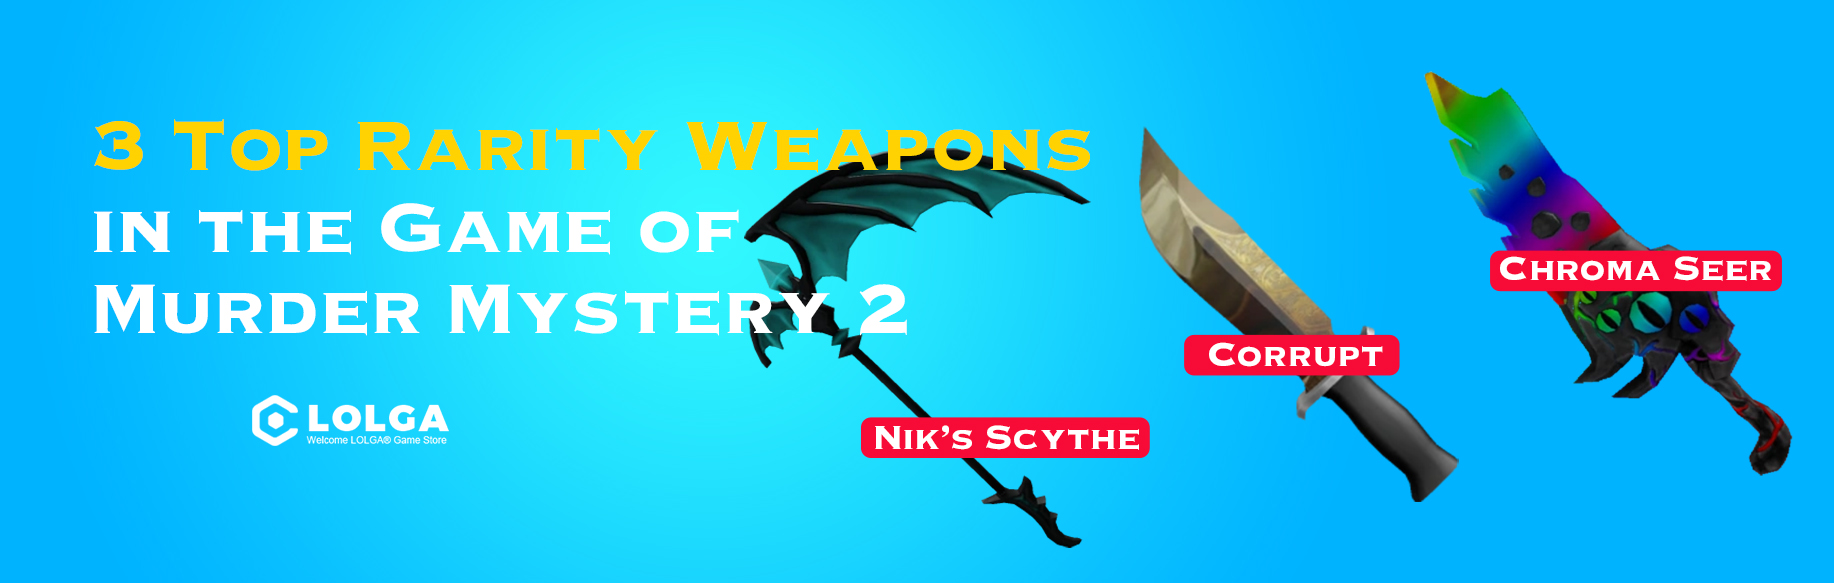 3 Top Rarity Weapons in the Game of Murder Mystery 2